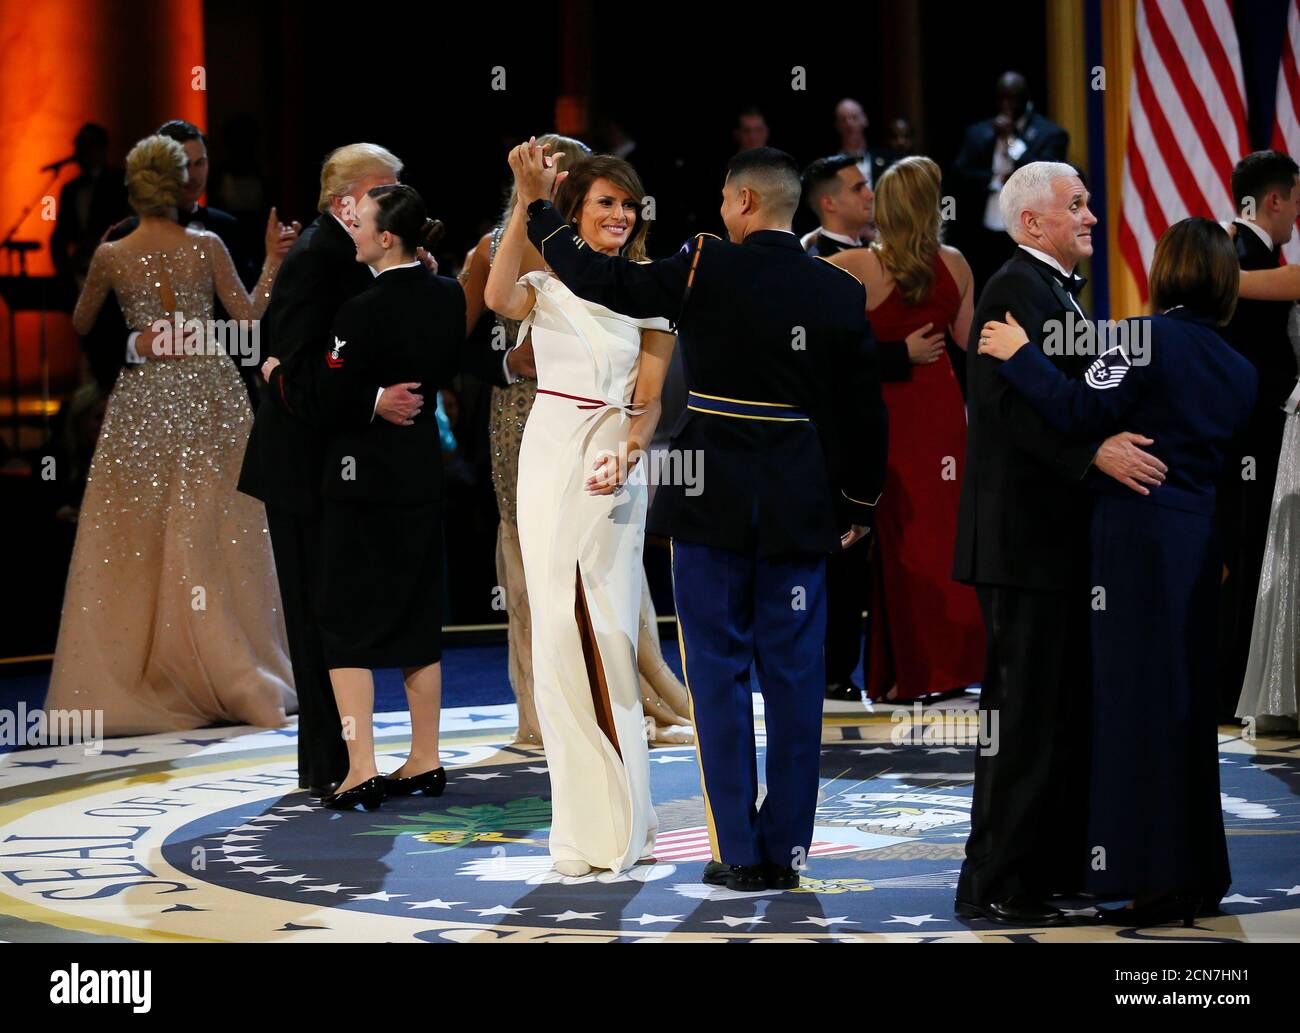 United States Army Staff Sergeant Jose A. Medina dances with U.S. first lady Melania Trump (C) during the 'Salute to Our Armed Services Ball' on Inauguration Day in Washington, D.C, U.S. January 20, 2017.   REUTERS/Rick Wilking Stock Photo